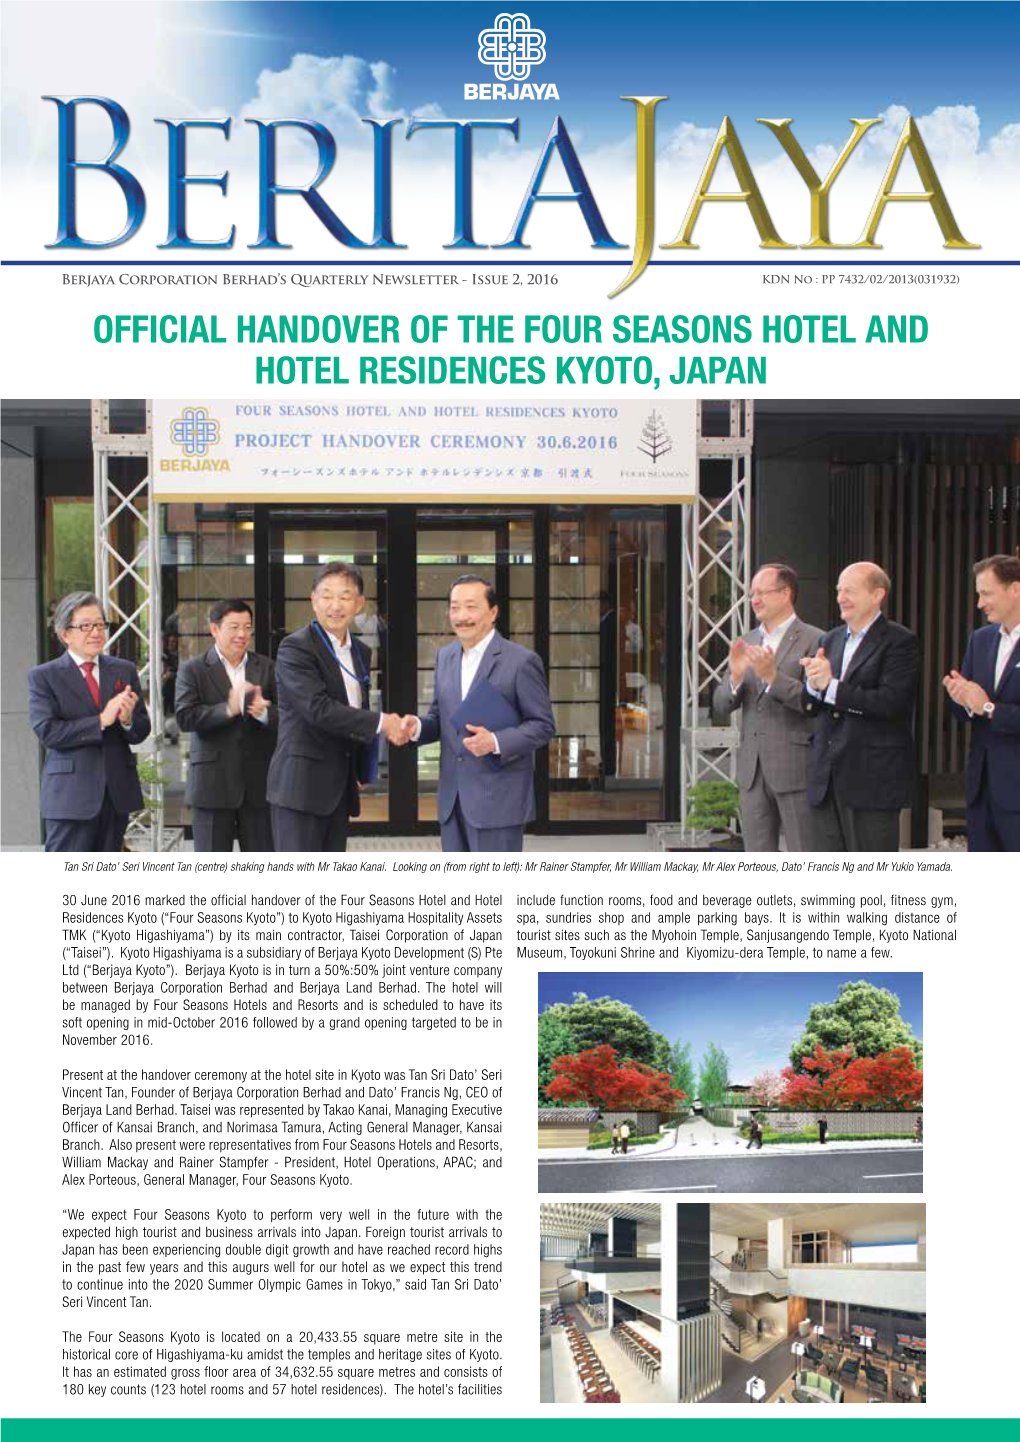 Official Handover of the Four Seasons Hotel and Hotel Residences Kyoto, Japan